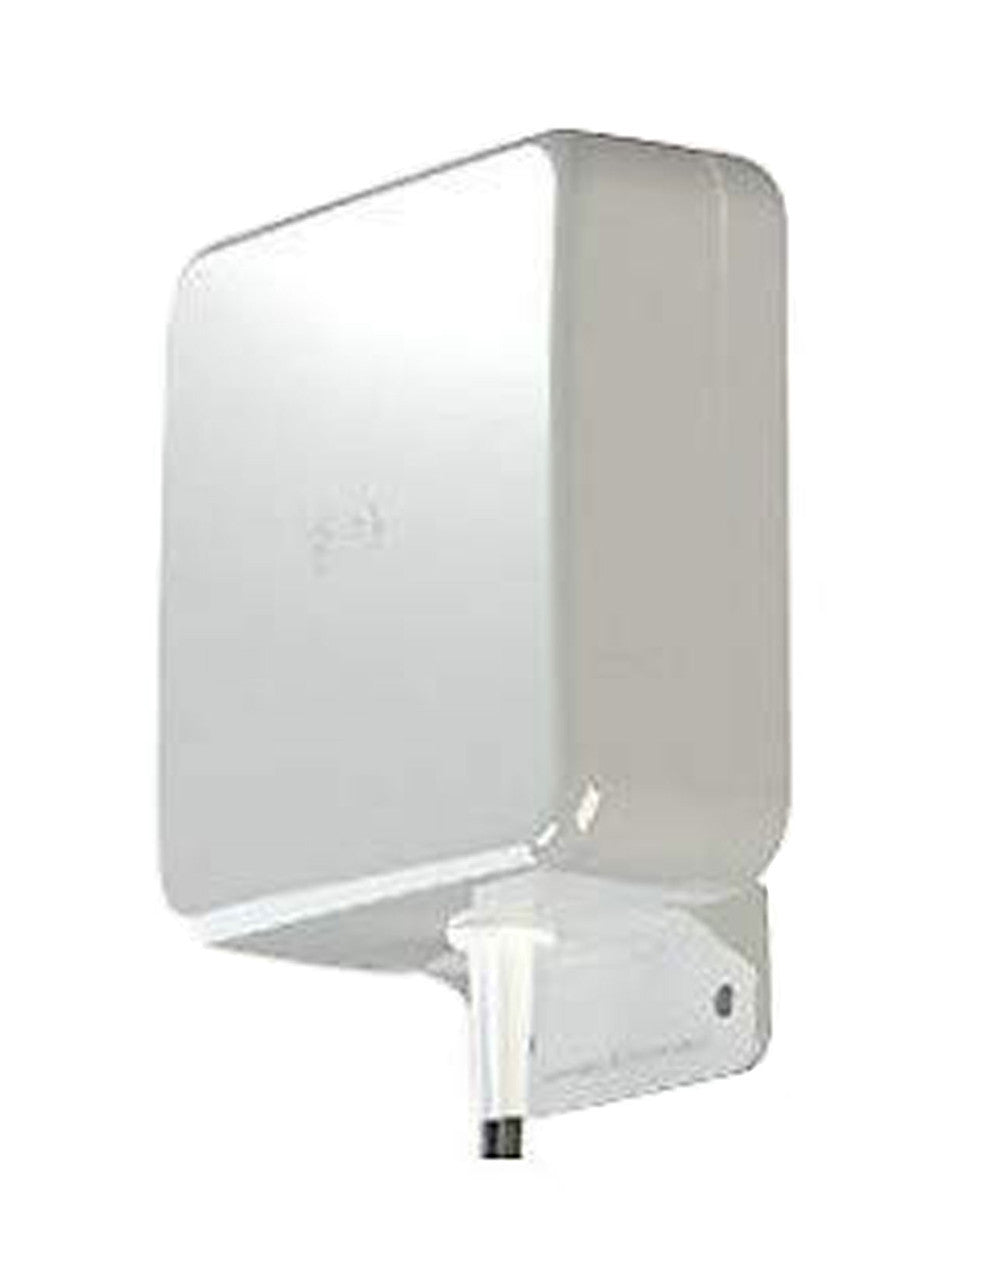 Sierra Wireless MIMO, Omni-Directional Wall/Post Antenna, 698-2700MHZ (0,3m - N female connectors) - 6001126